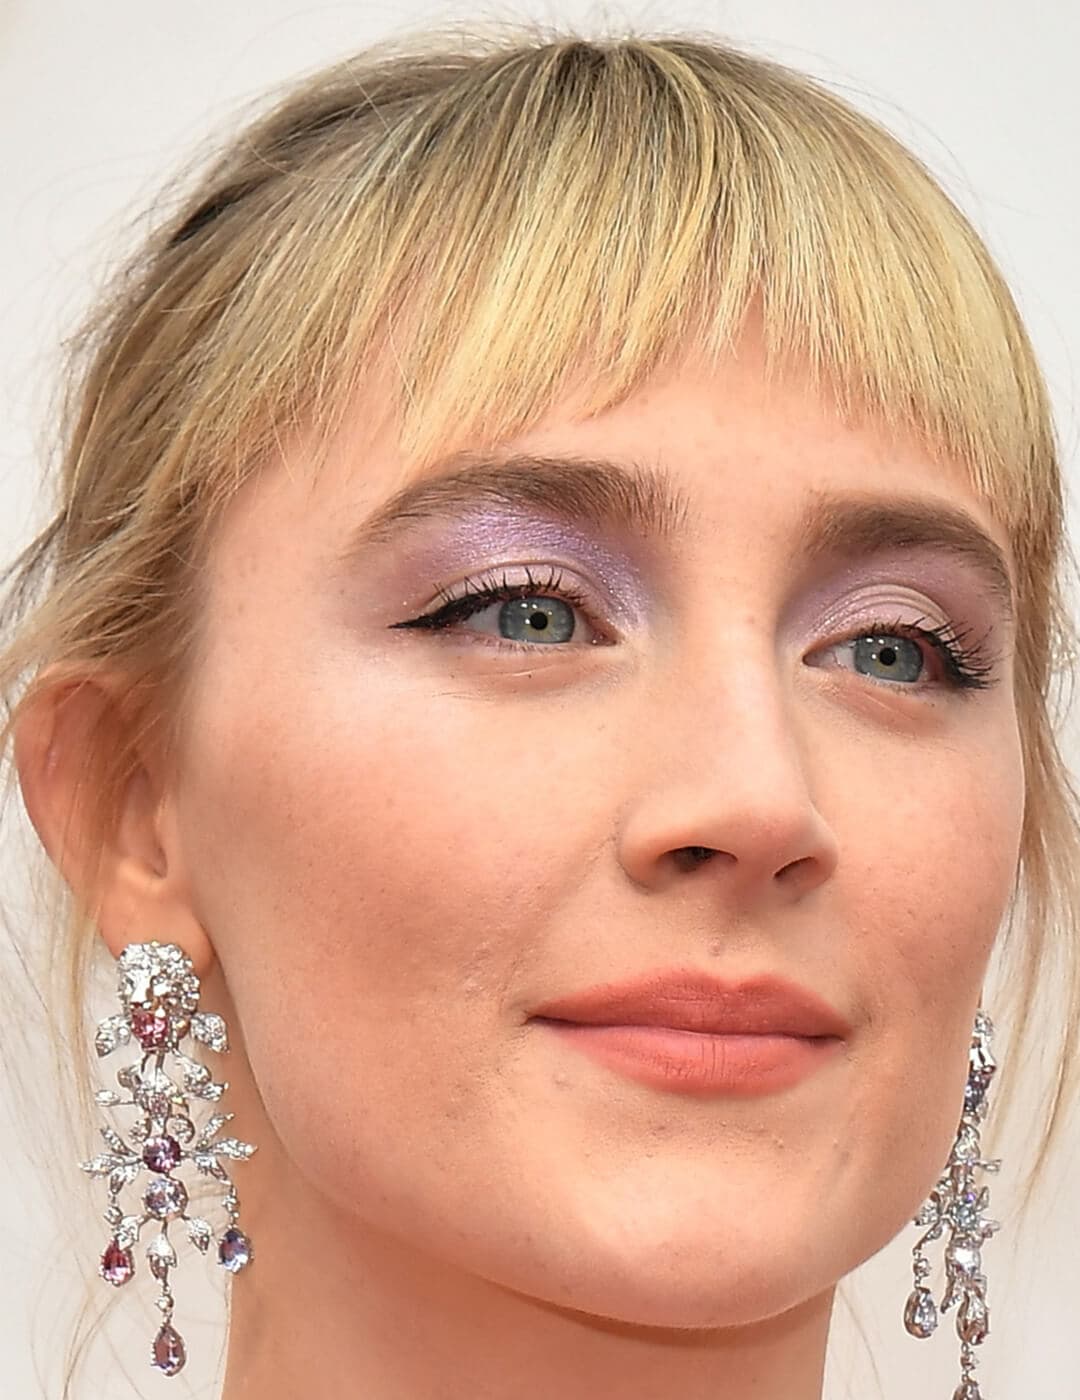 A photo of Saoirse Ronan showing her combined blue and purple eyeshadow on a white background